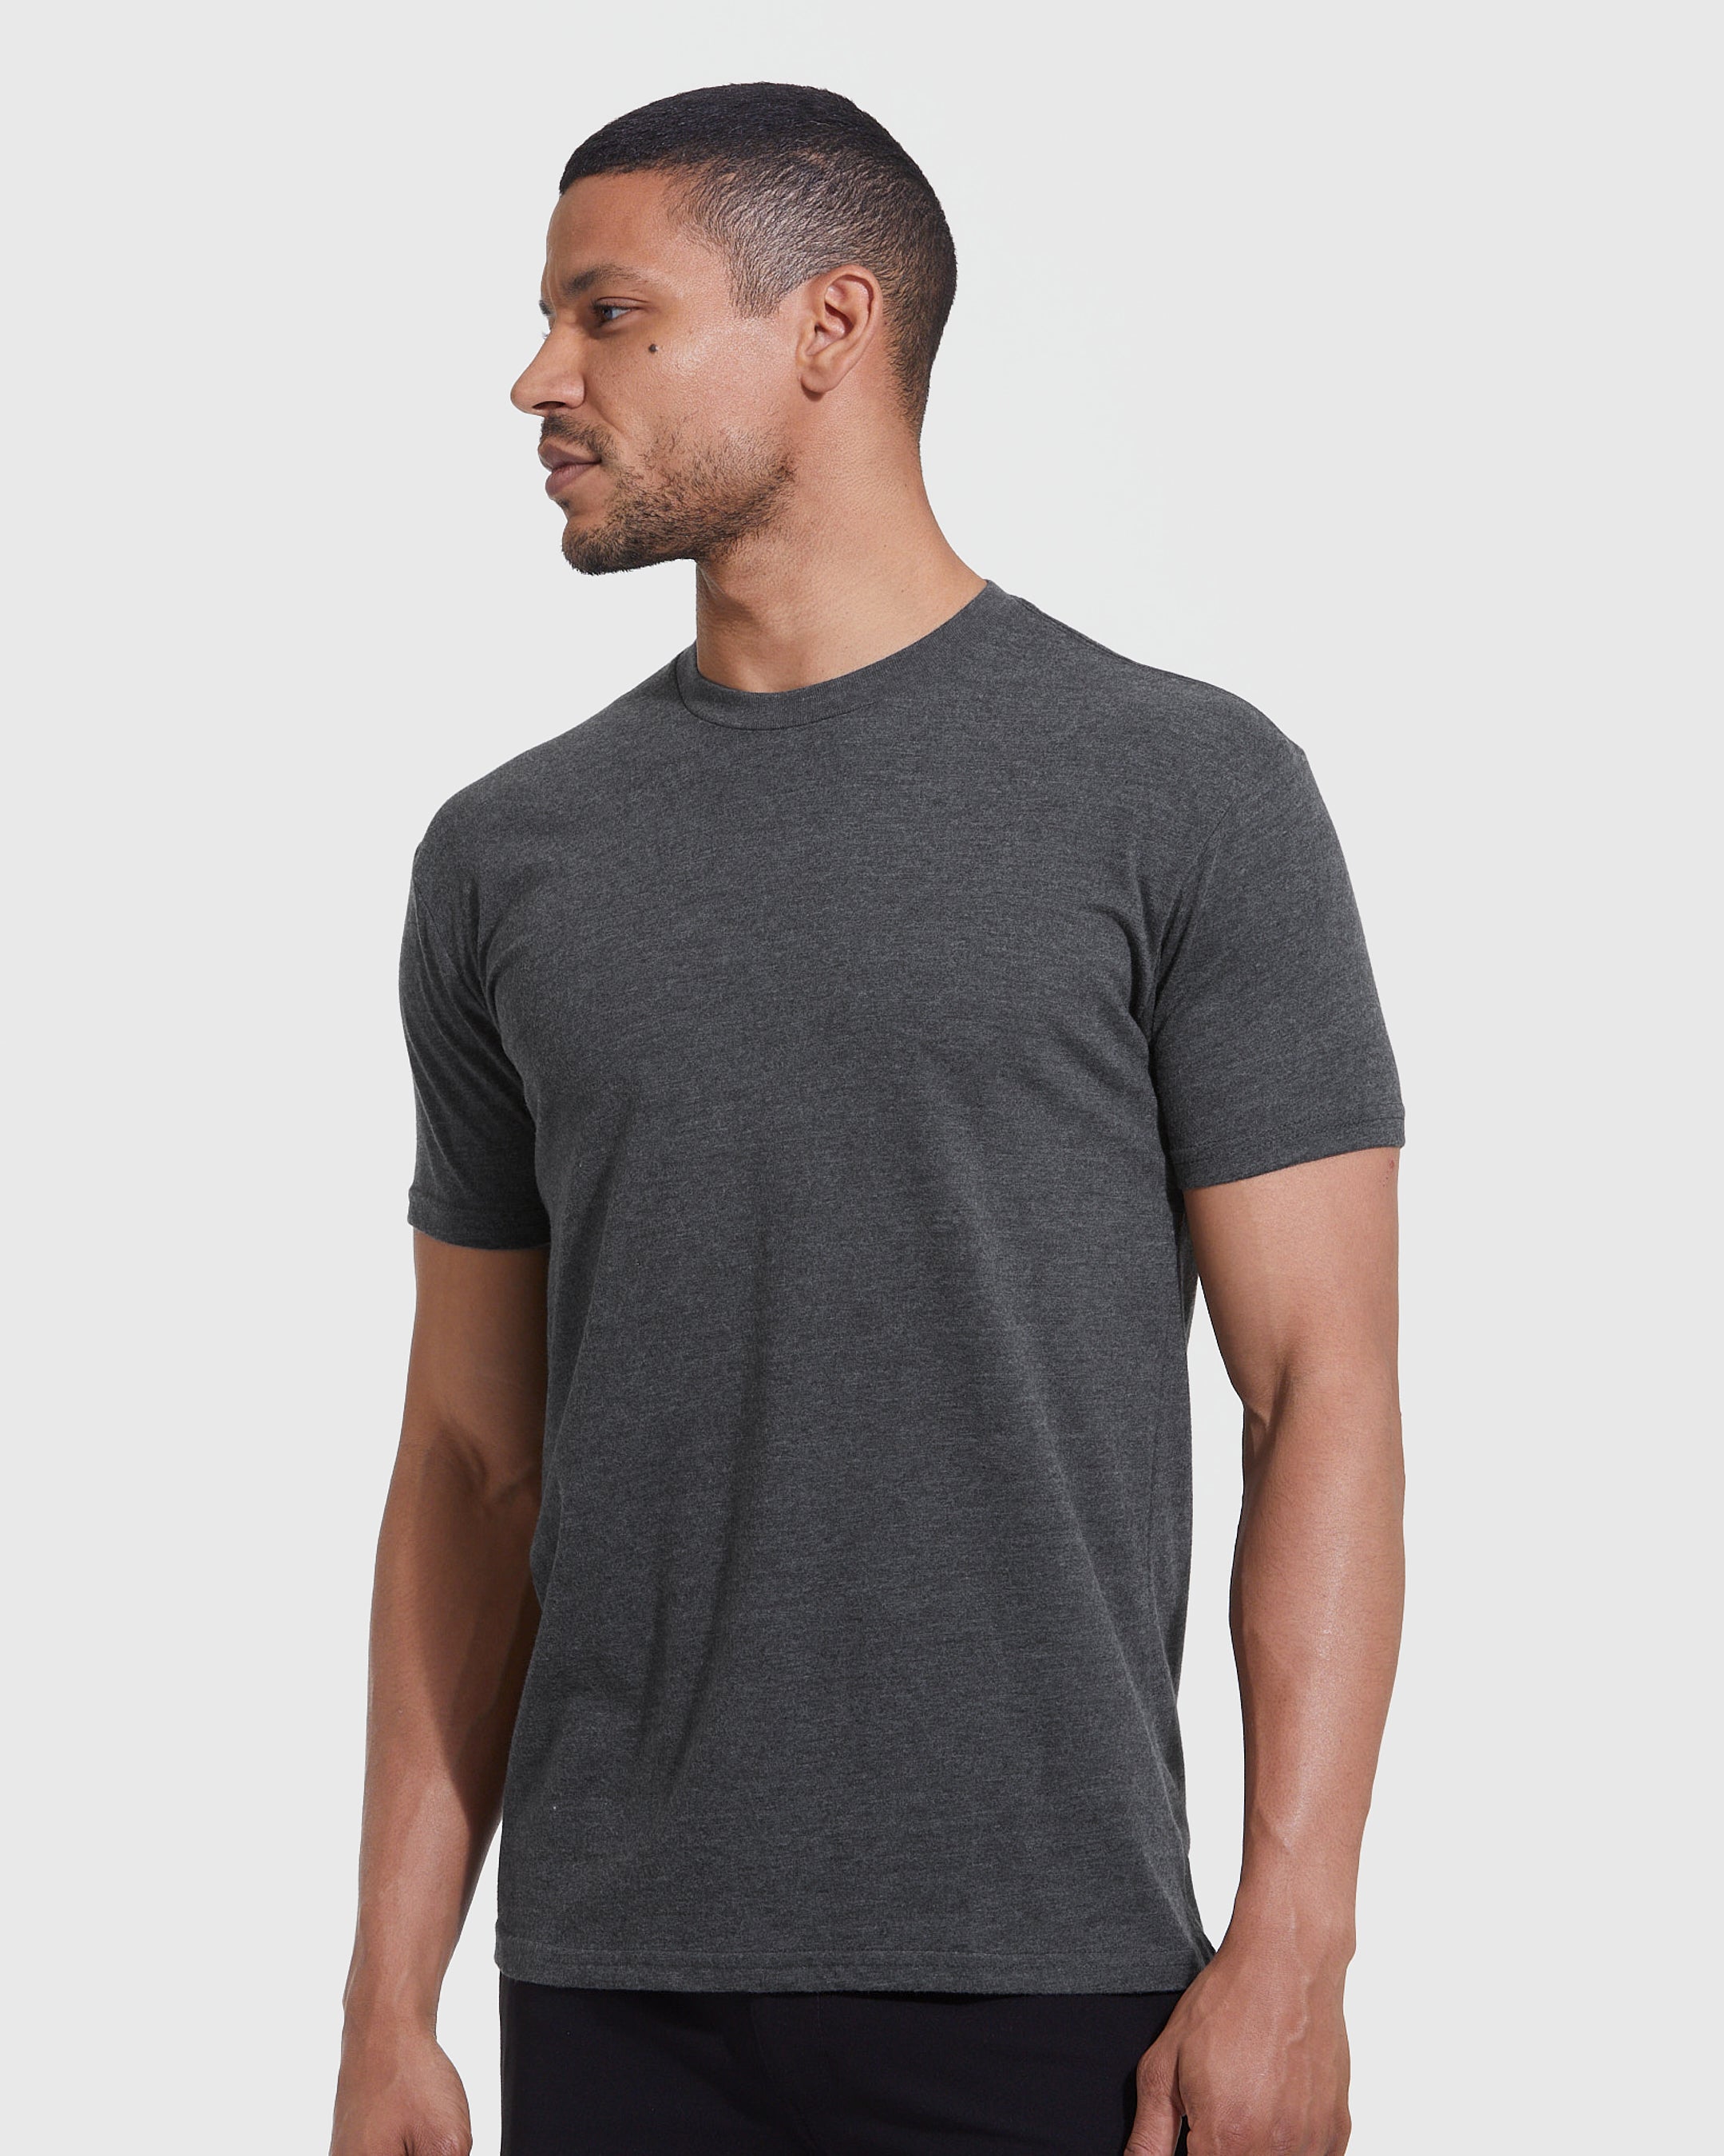 The Classic T-Shirt Company Short Sleeve Crew Neck Review